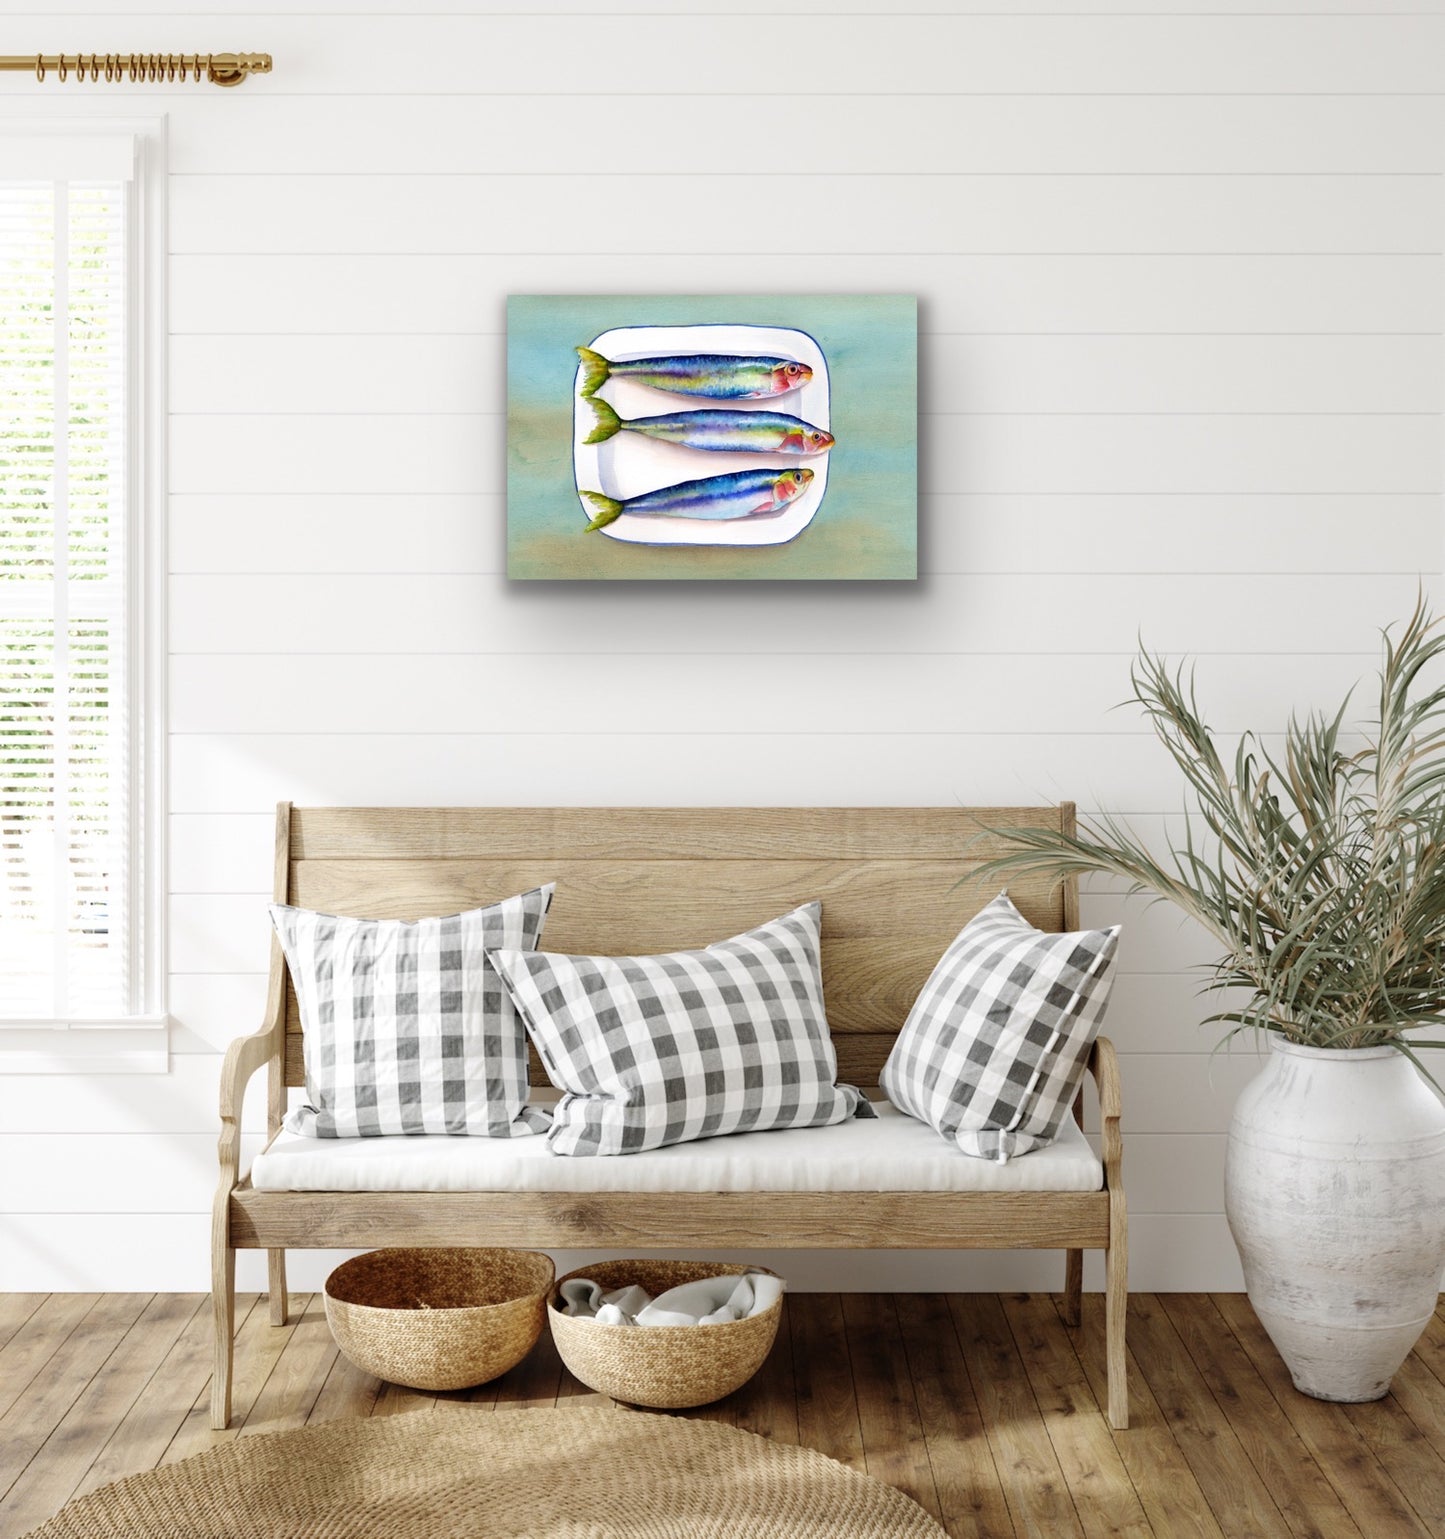 Sardines for Supper, Fine Art Giclee Limited Edition Print